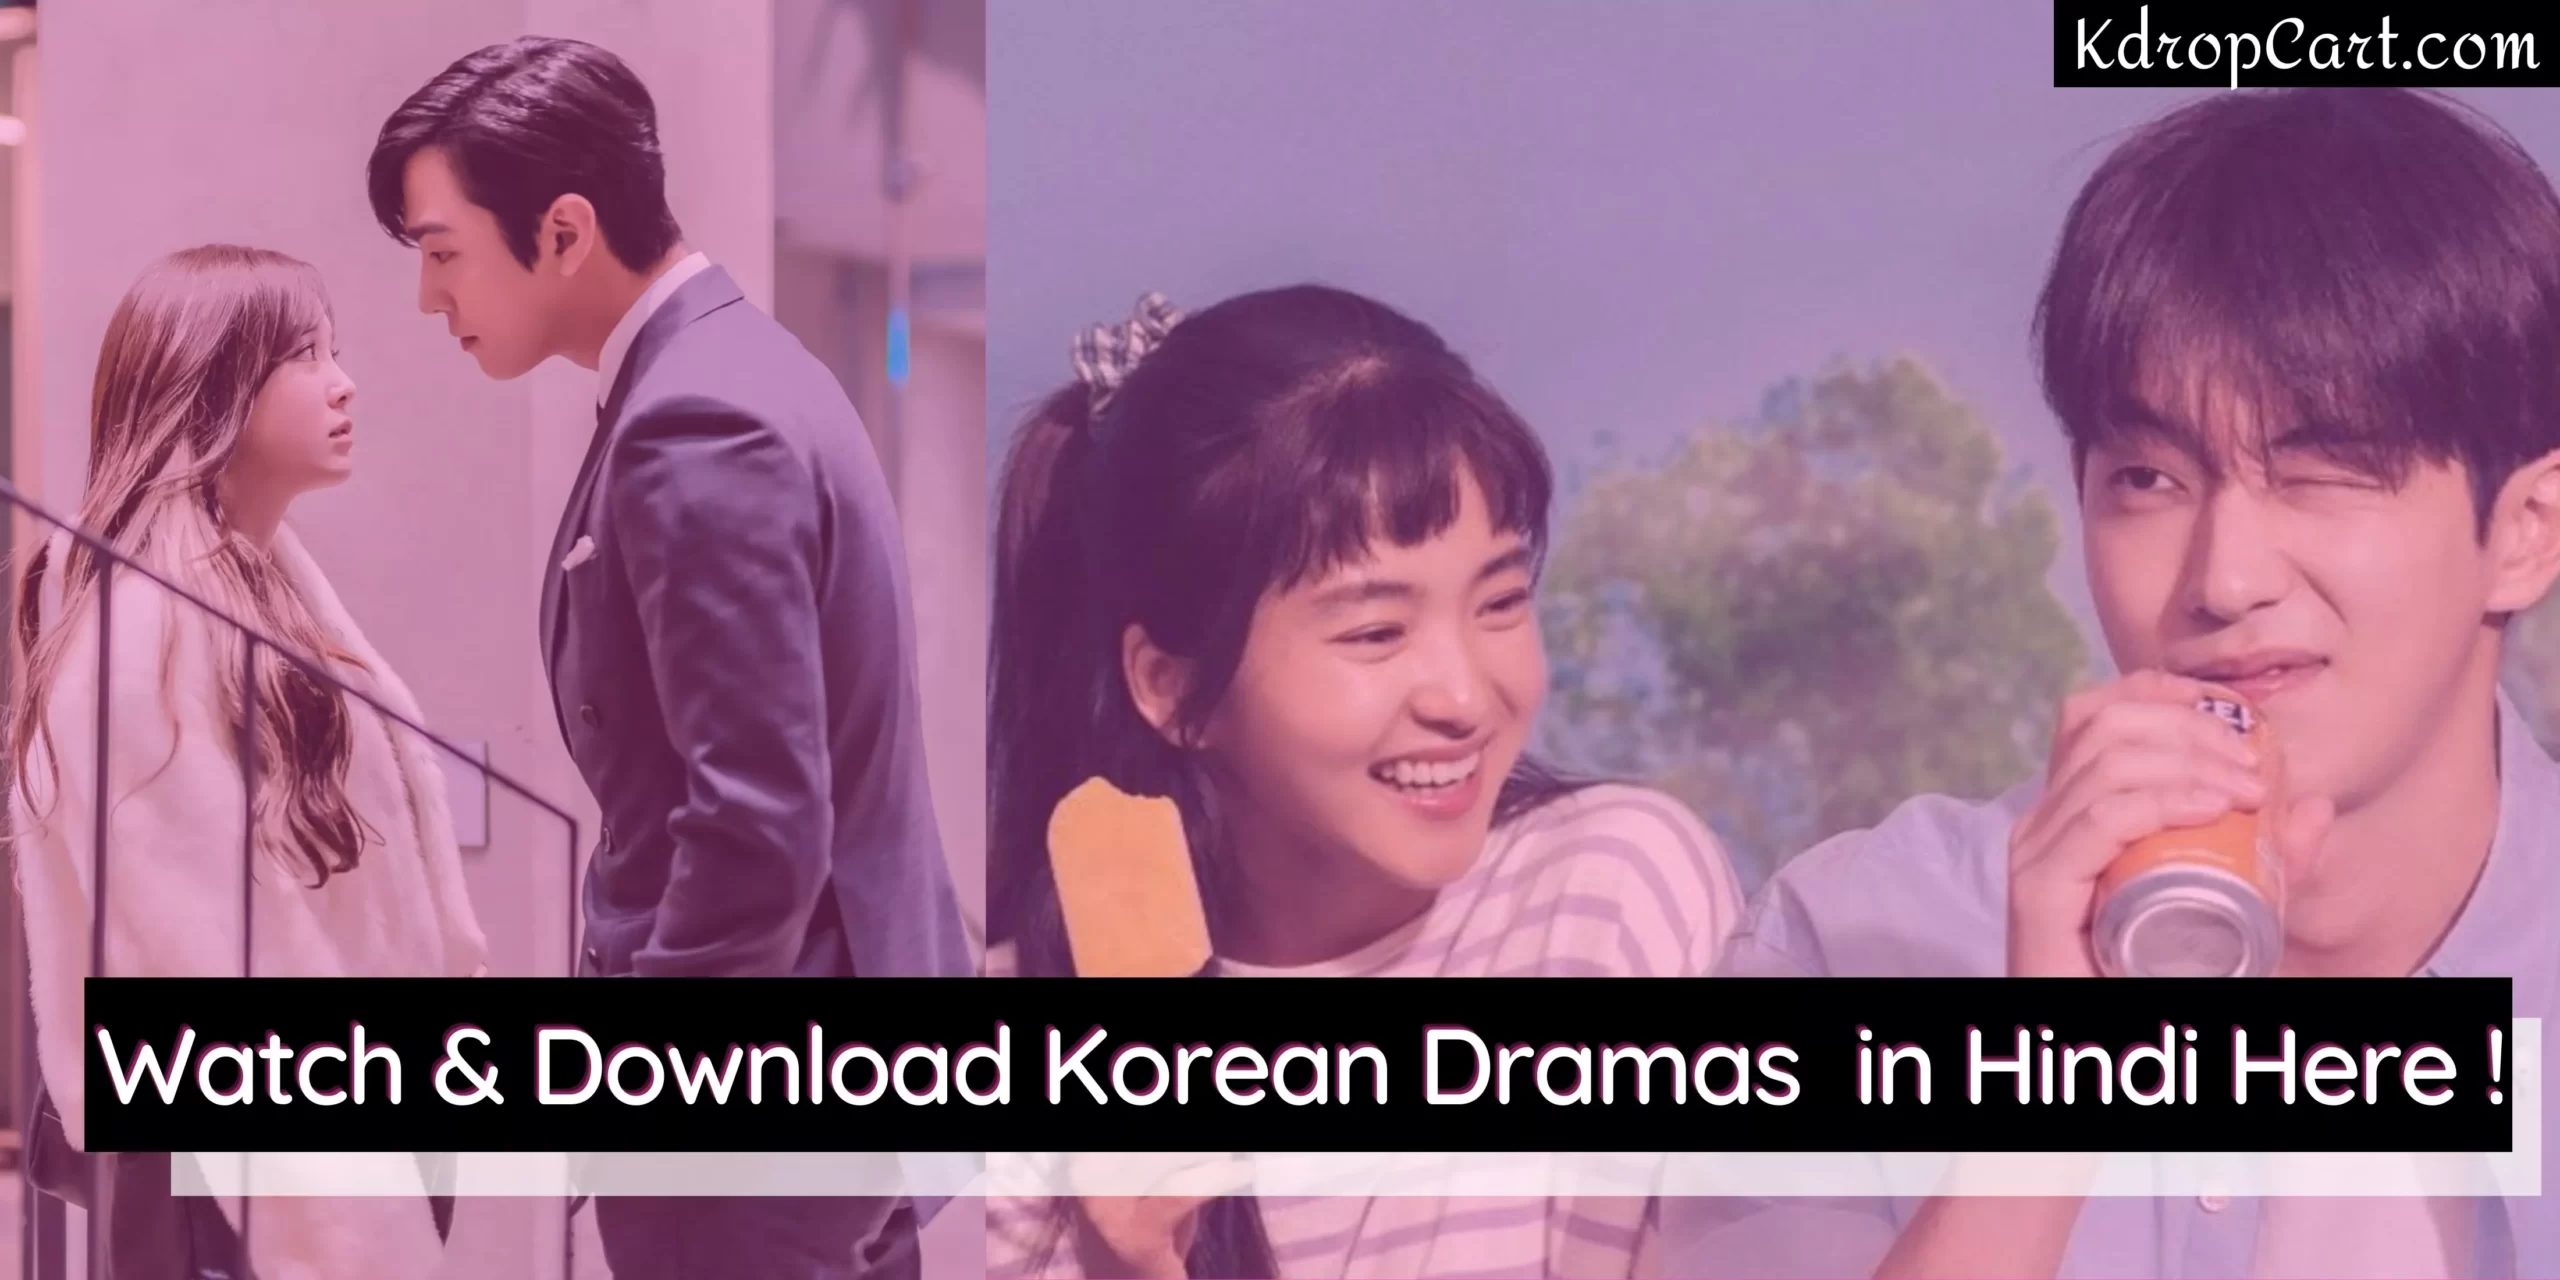 watch and download kdramas in Hindi